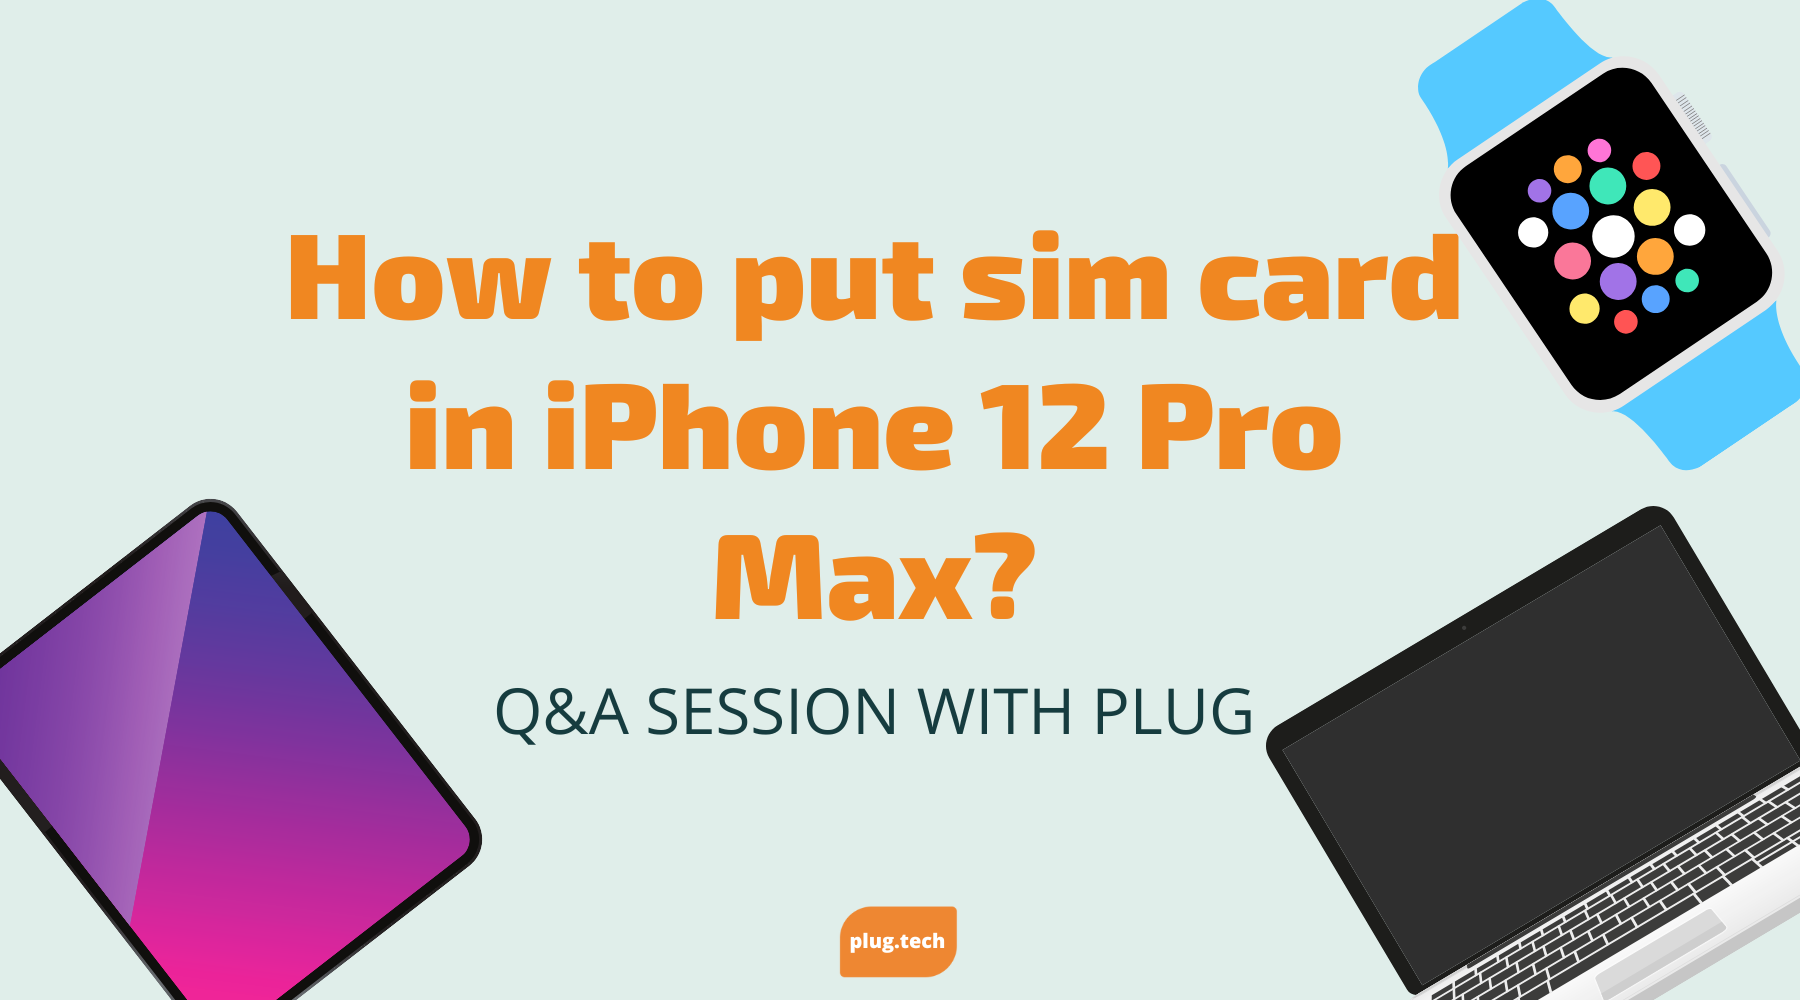 How to put sim card in iPhone 12 Pro Max?